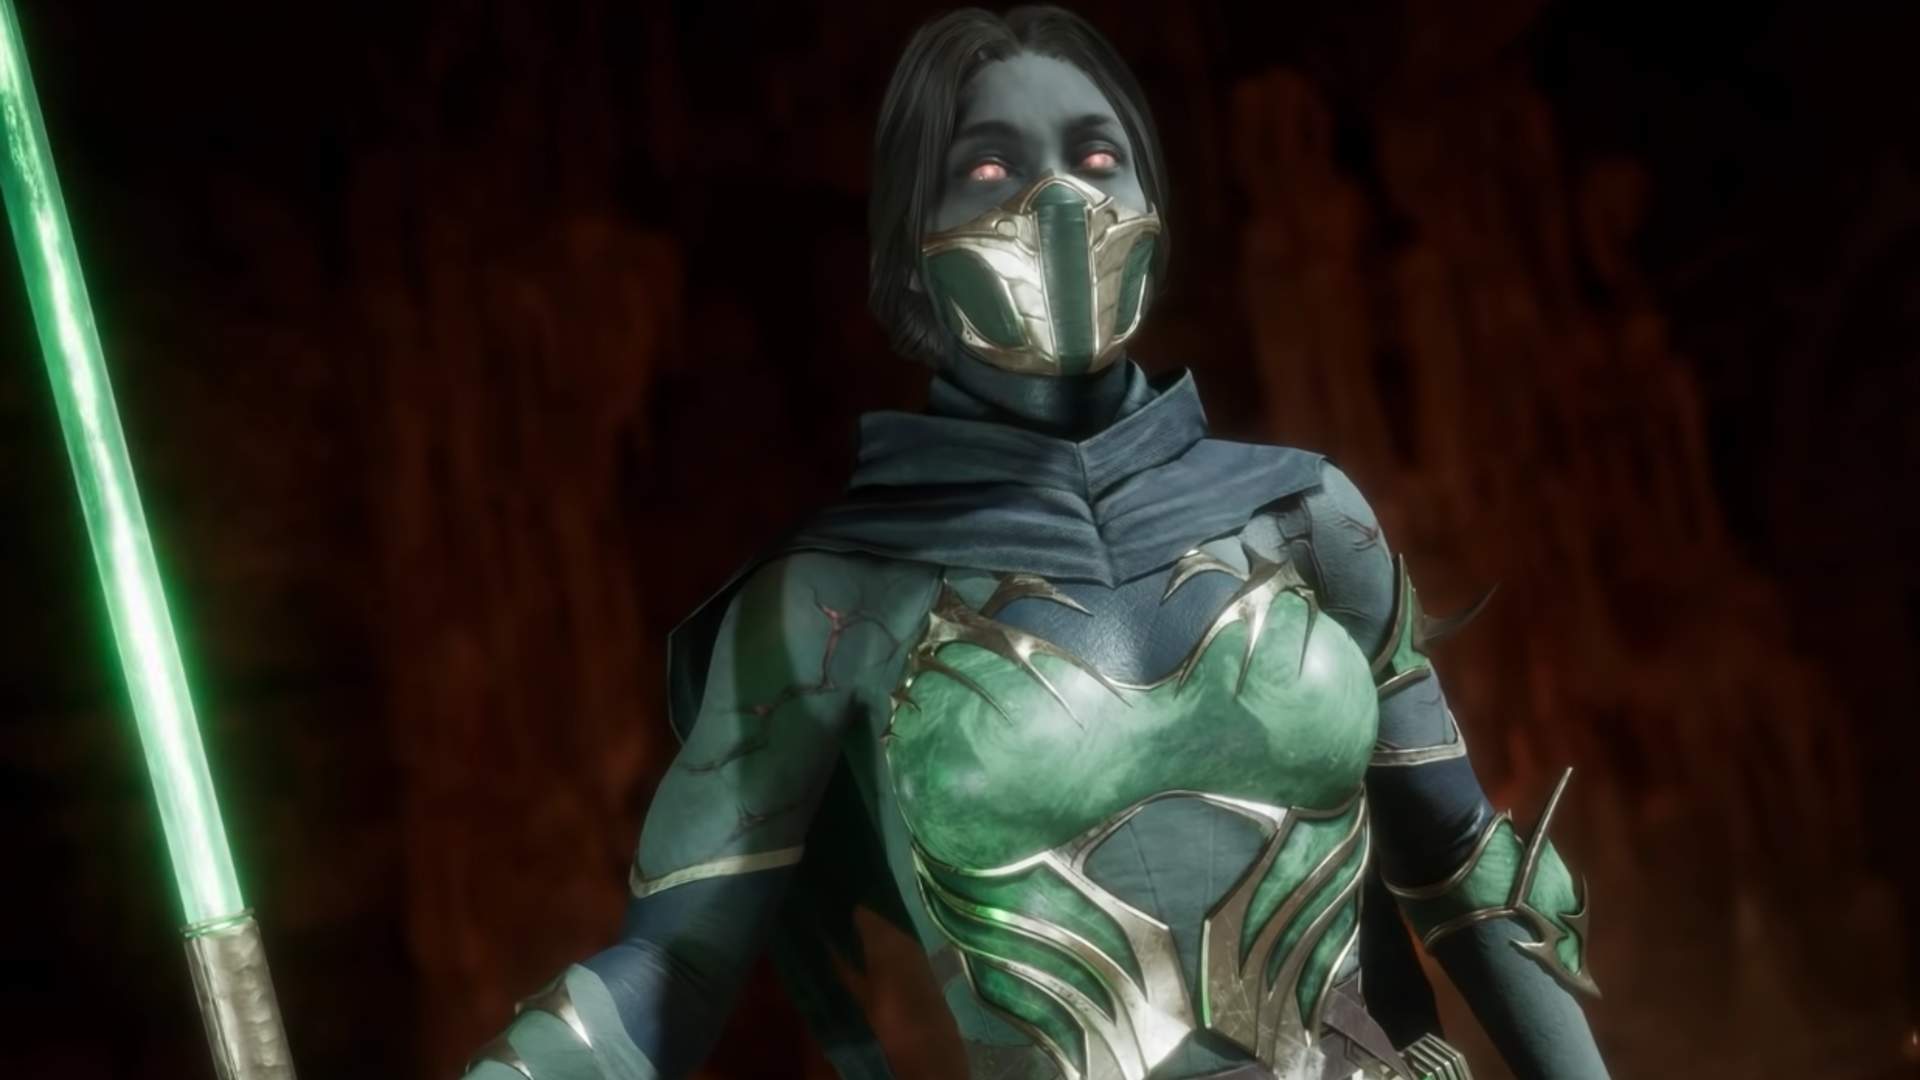 Jade is Back in Mortal Kombat 11 With a Surprising New Look